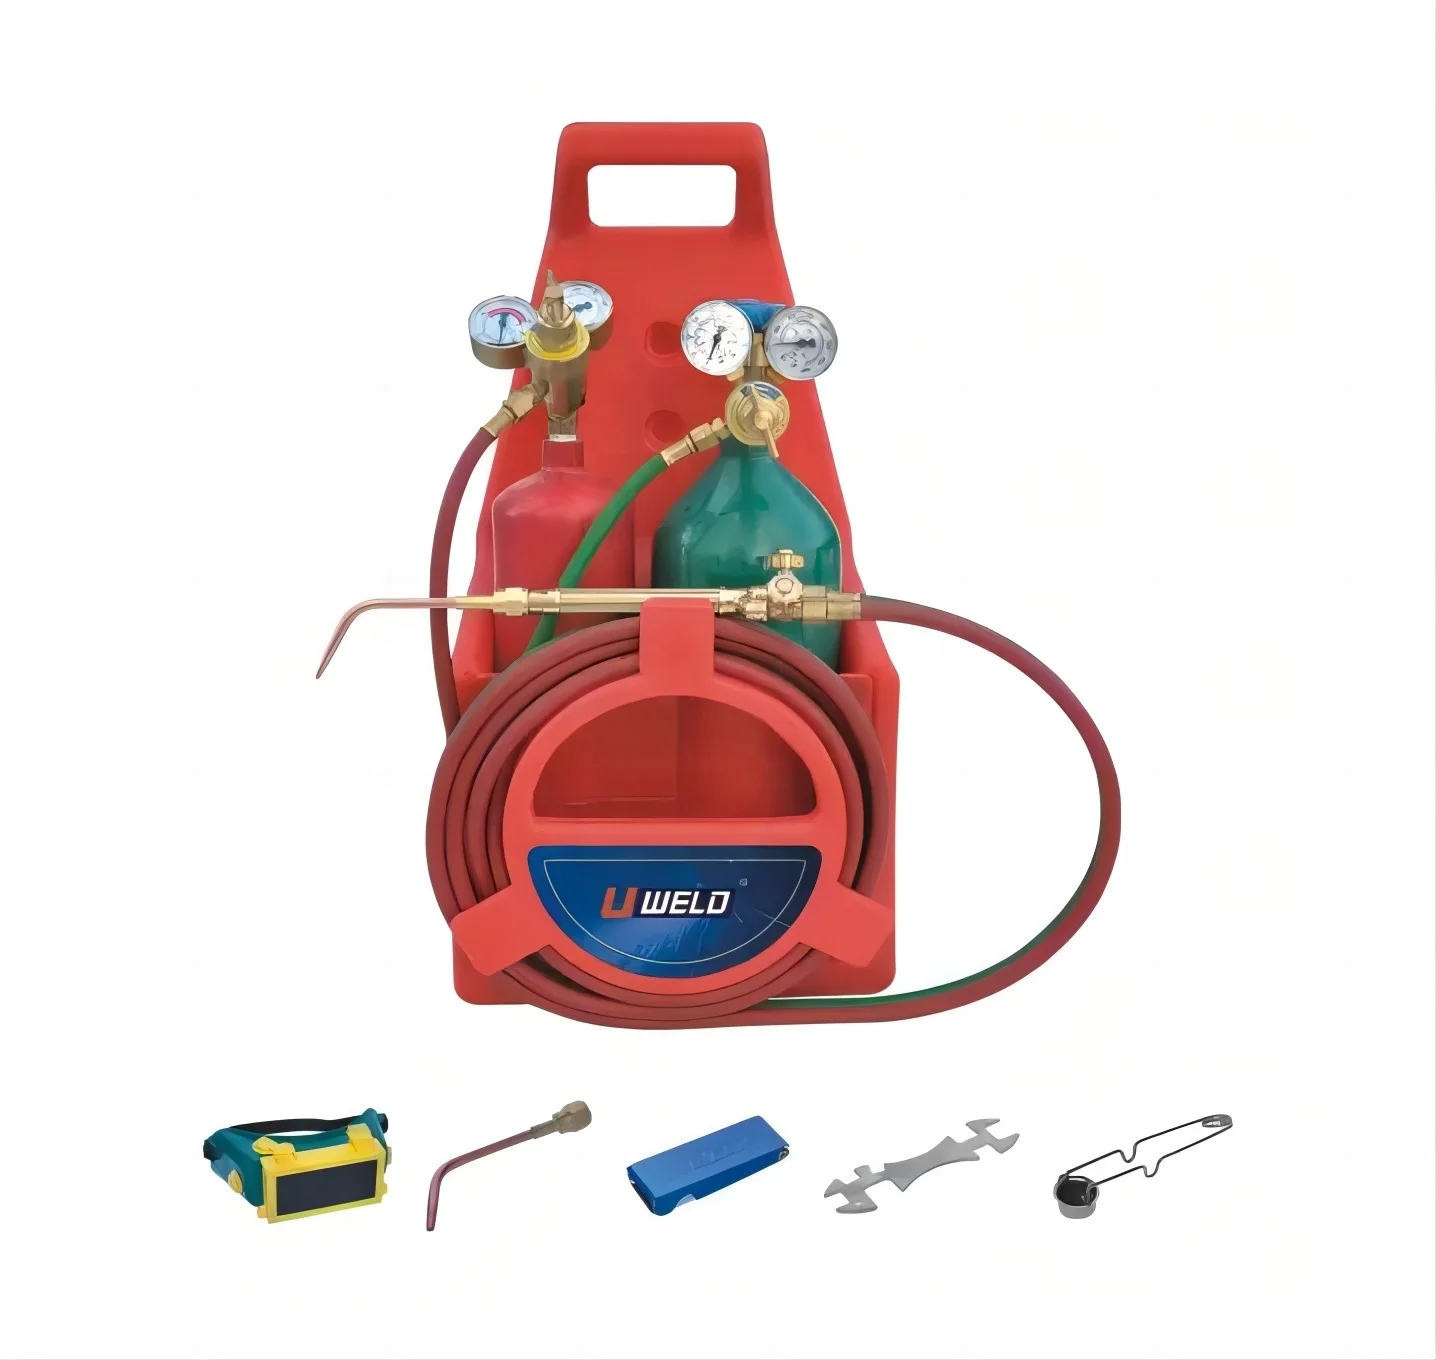 Hot Selling Portable Welding And Cutting Torch Kit with Oxygen Acetylene Tank Kit